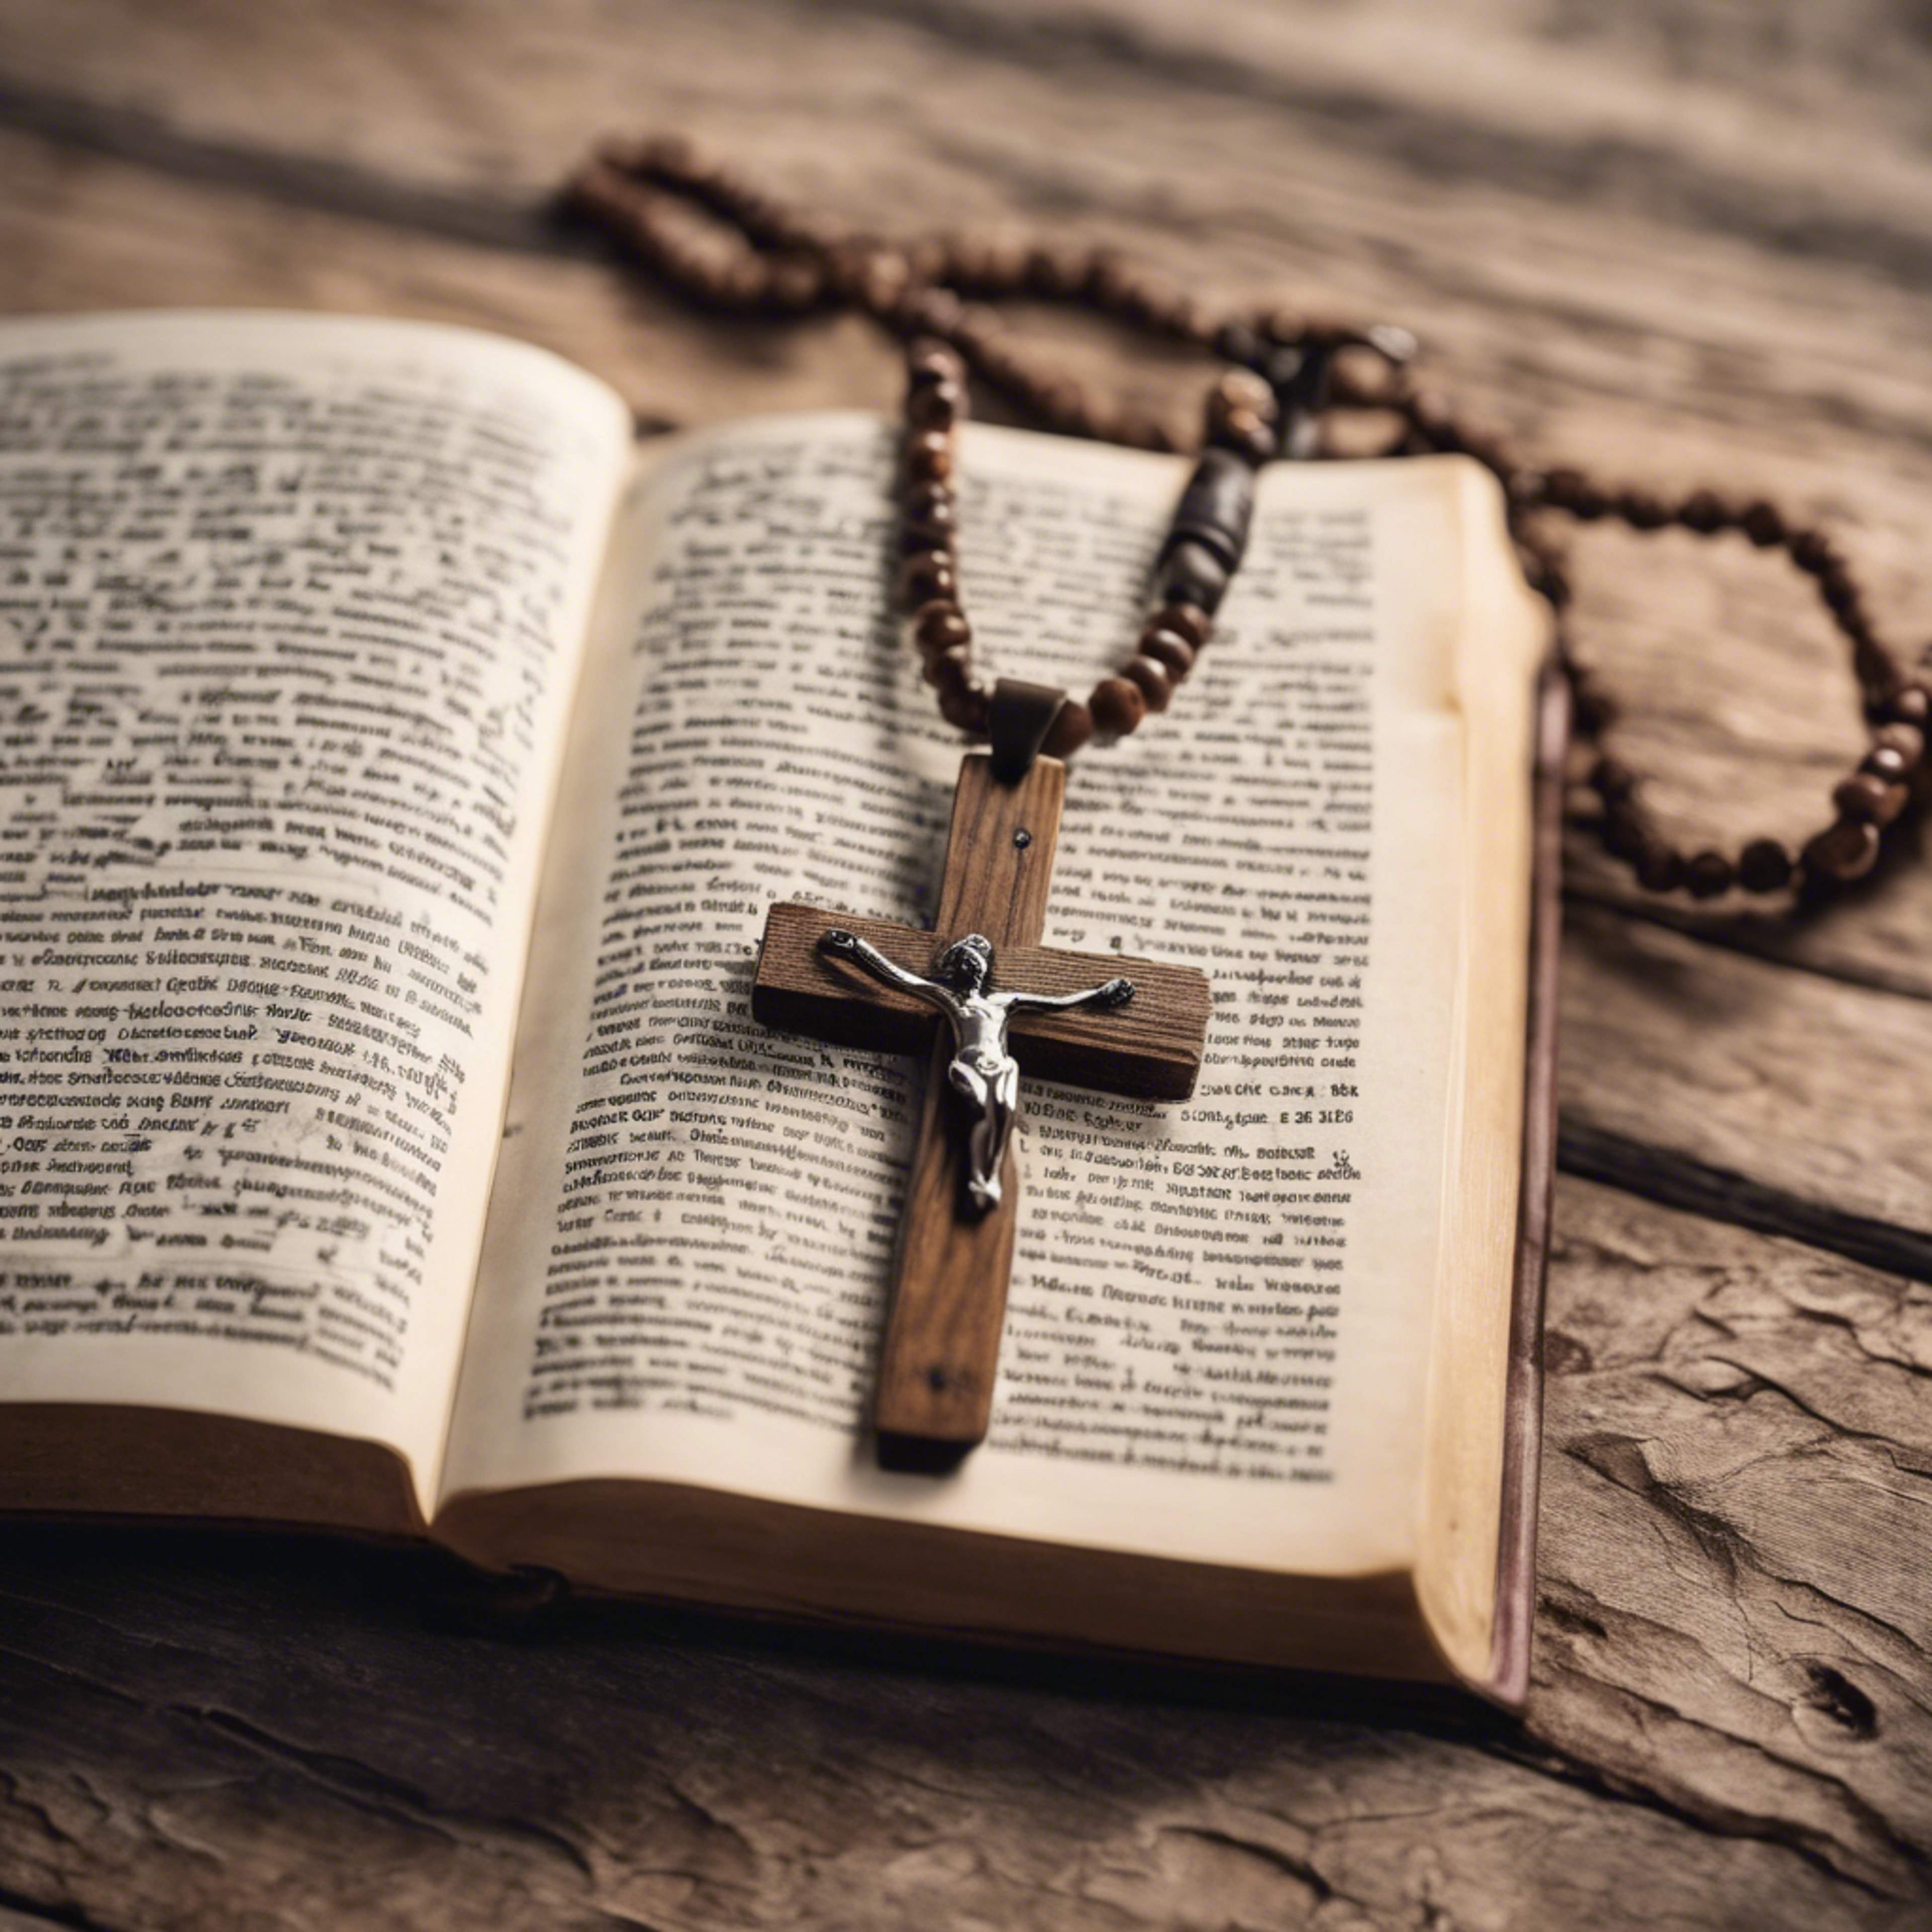 A rustic wooden cross pendant, resting on an open Bible with highlighted verses. Wallpaper[546e5e84b1254317a8cf]